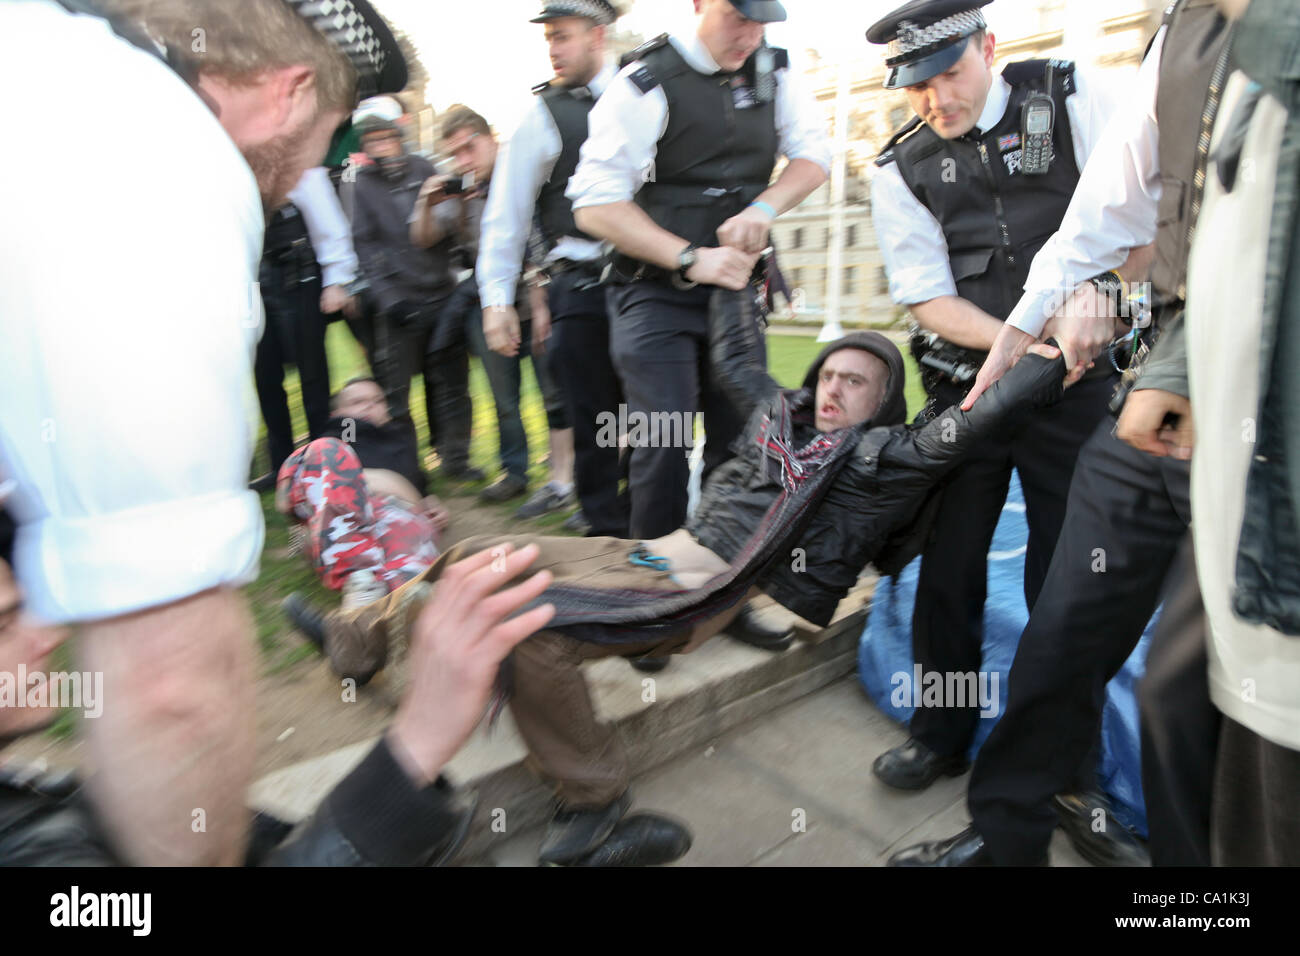 LONDON, UK, 20th Mar, 2012. One of the activists is arrested by police. Activists had gathered in Parliament Square to protest against the proposed anti squatting law being voted on in the house of lords. Stock Photo